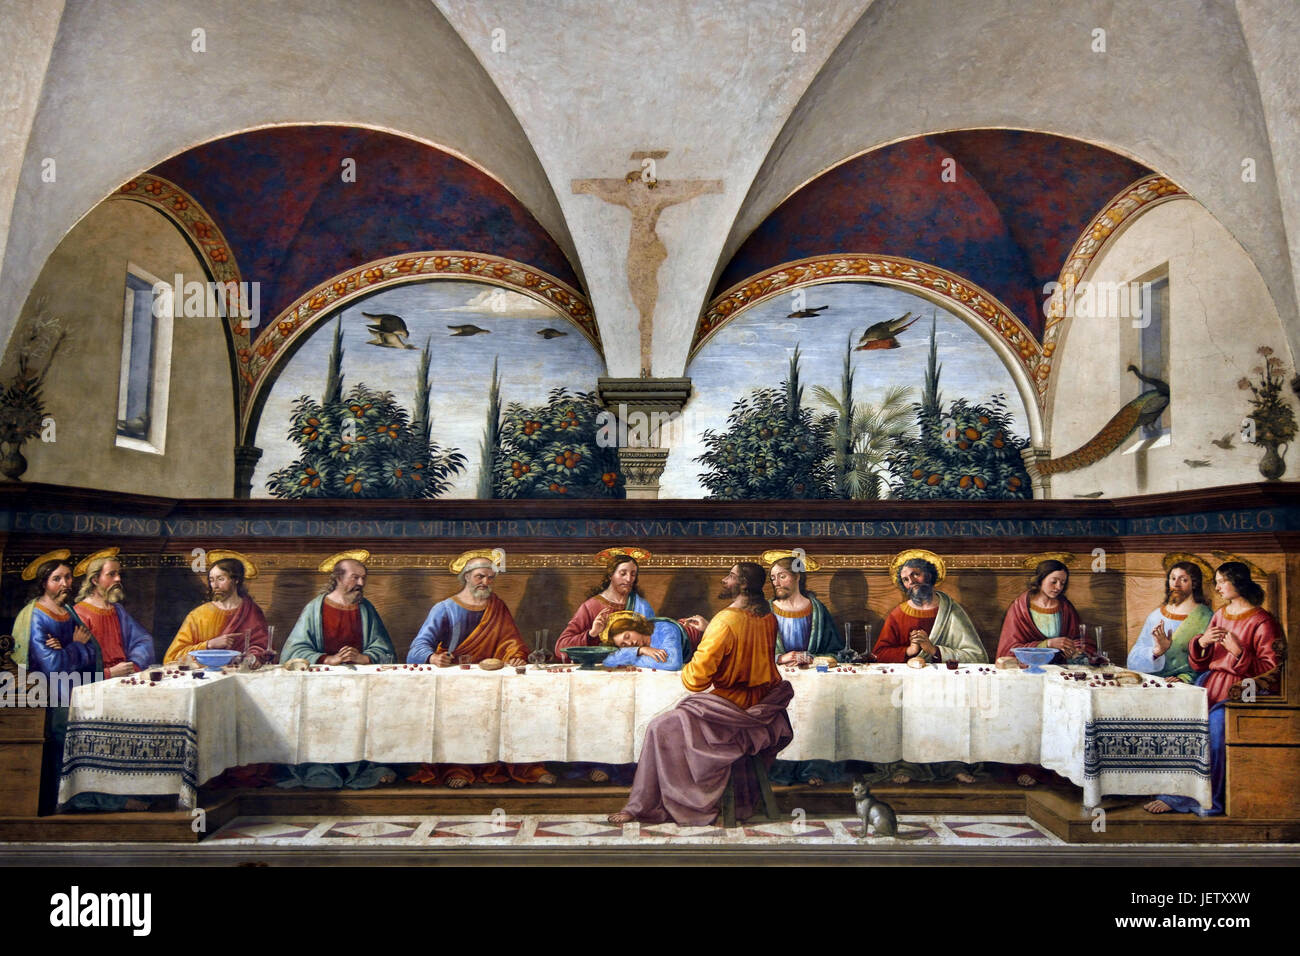 The Last Supper 1480 is a fresco depicting the Last Supper of Jesus by the Italian Renaissance artist Domenico Ghirlandaio 1448 –1494 located in Convent of the Ognissanti ( The chiesa di San Salvatore di Ognissanti - chiesa di Ognissanti ) Florence, Tuscany, Italy. Stock Photo